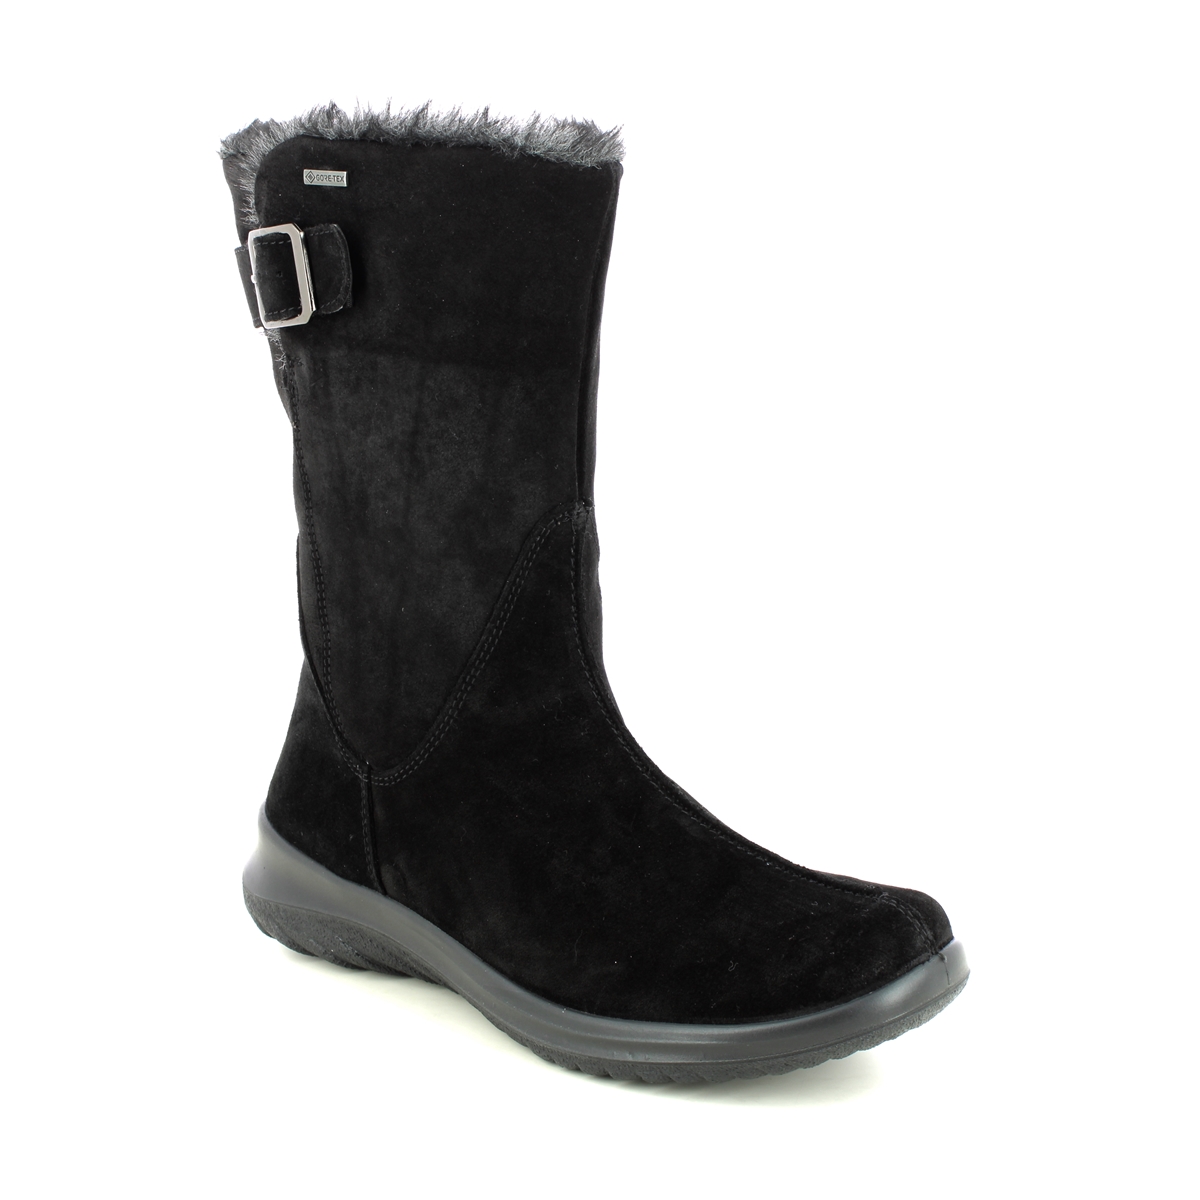 Legero Softboot Gtx Mid Black Suede Womens Mid Calf Boots 2009576-00 In Size 4 In Plain Black Suede